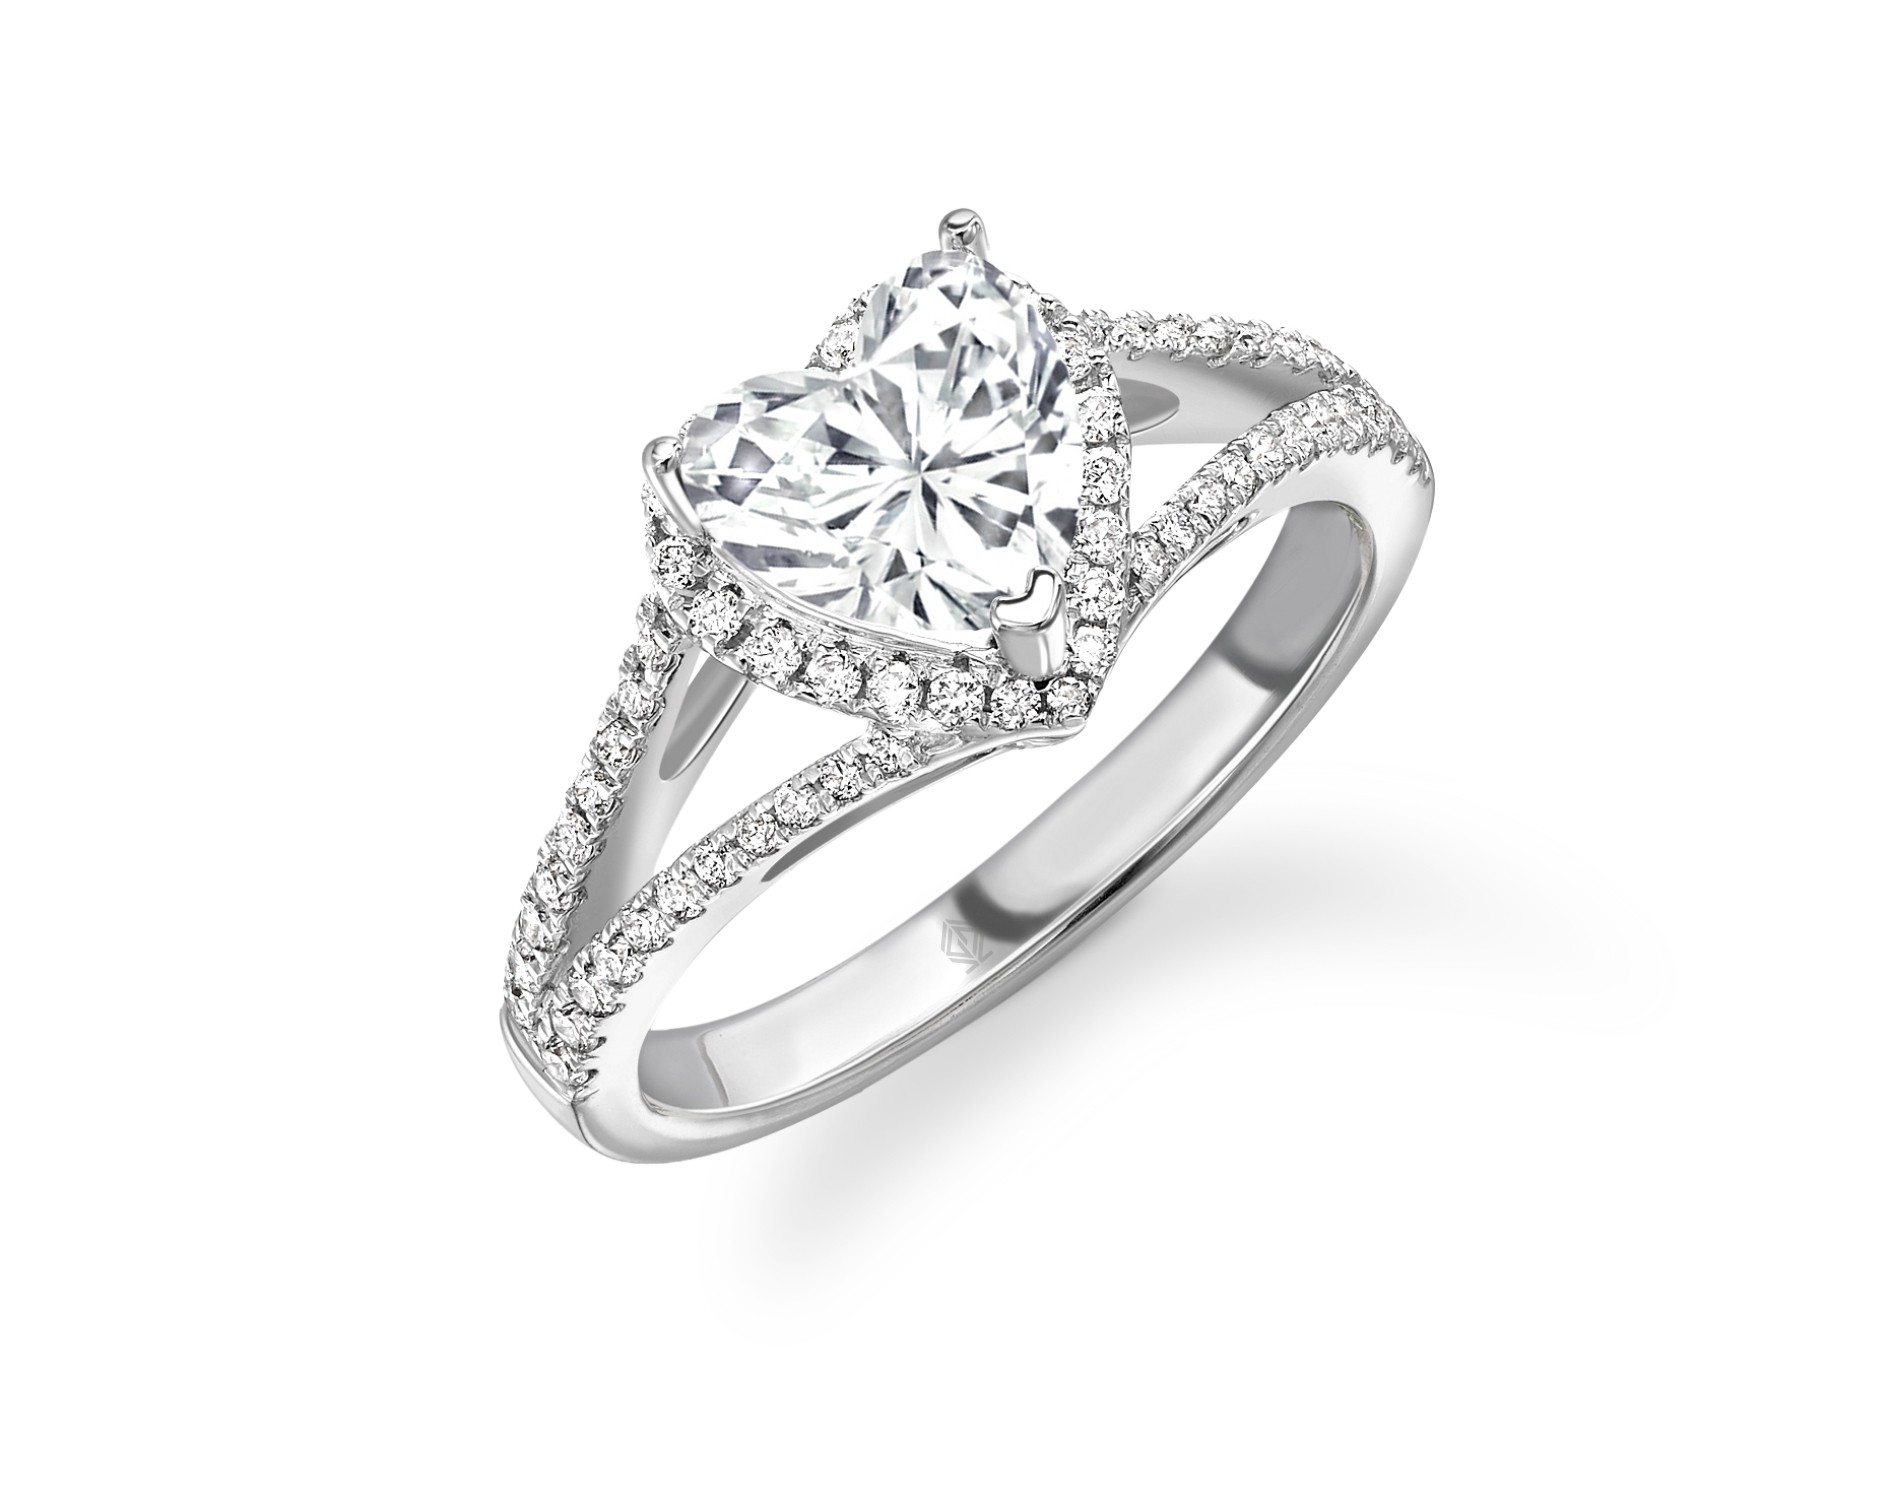 18K WHITE GOLD HEART CUT HALO DIAMOND ENGAGEMENT RING WITH SIDE STONES IN SPLIT SHANK PAVE SET